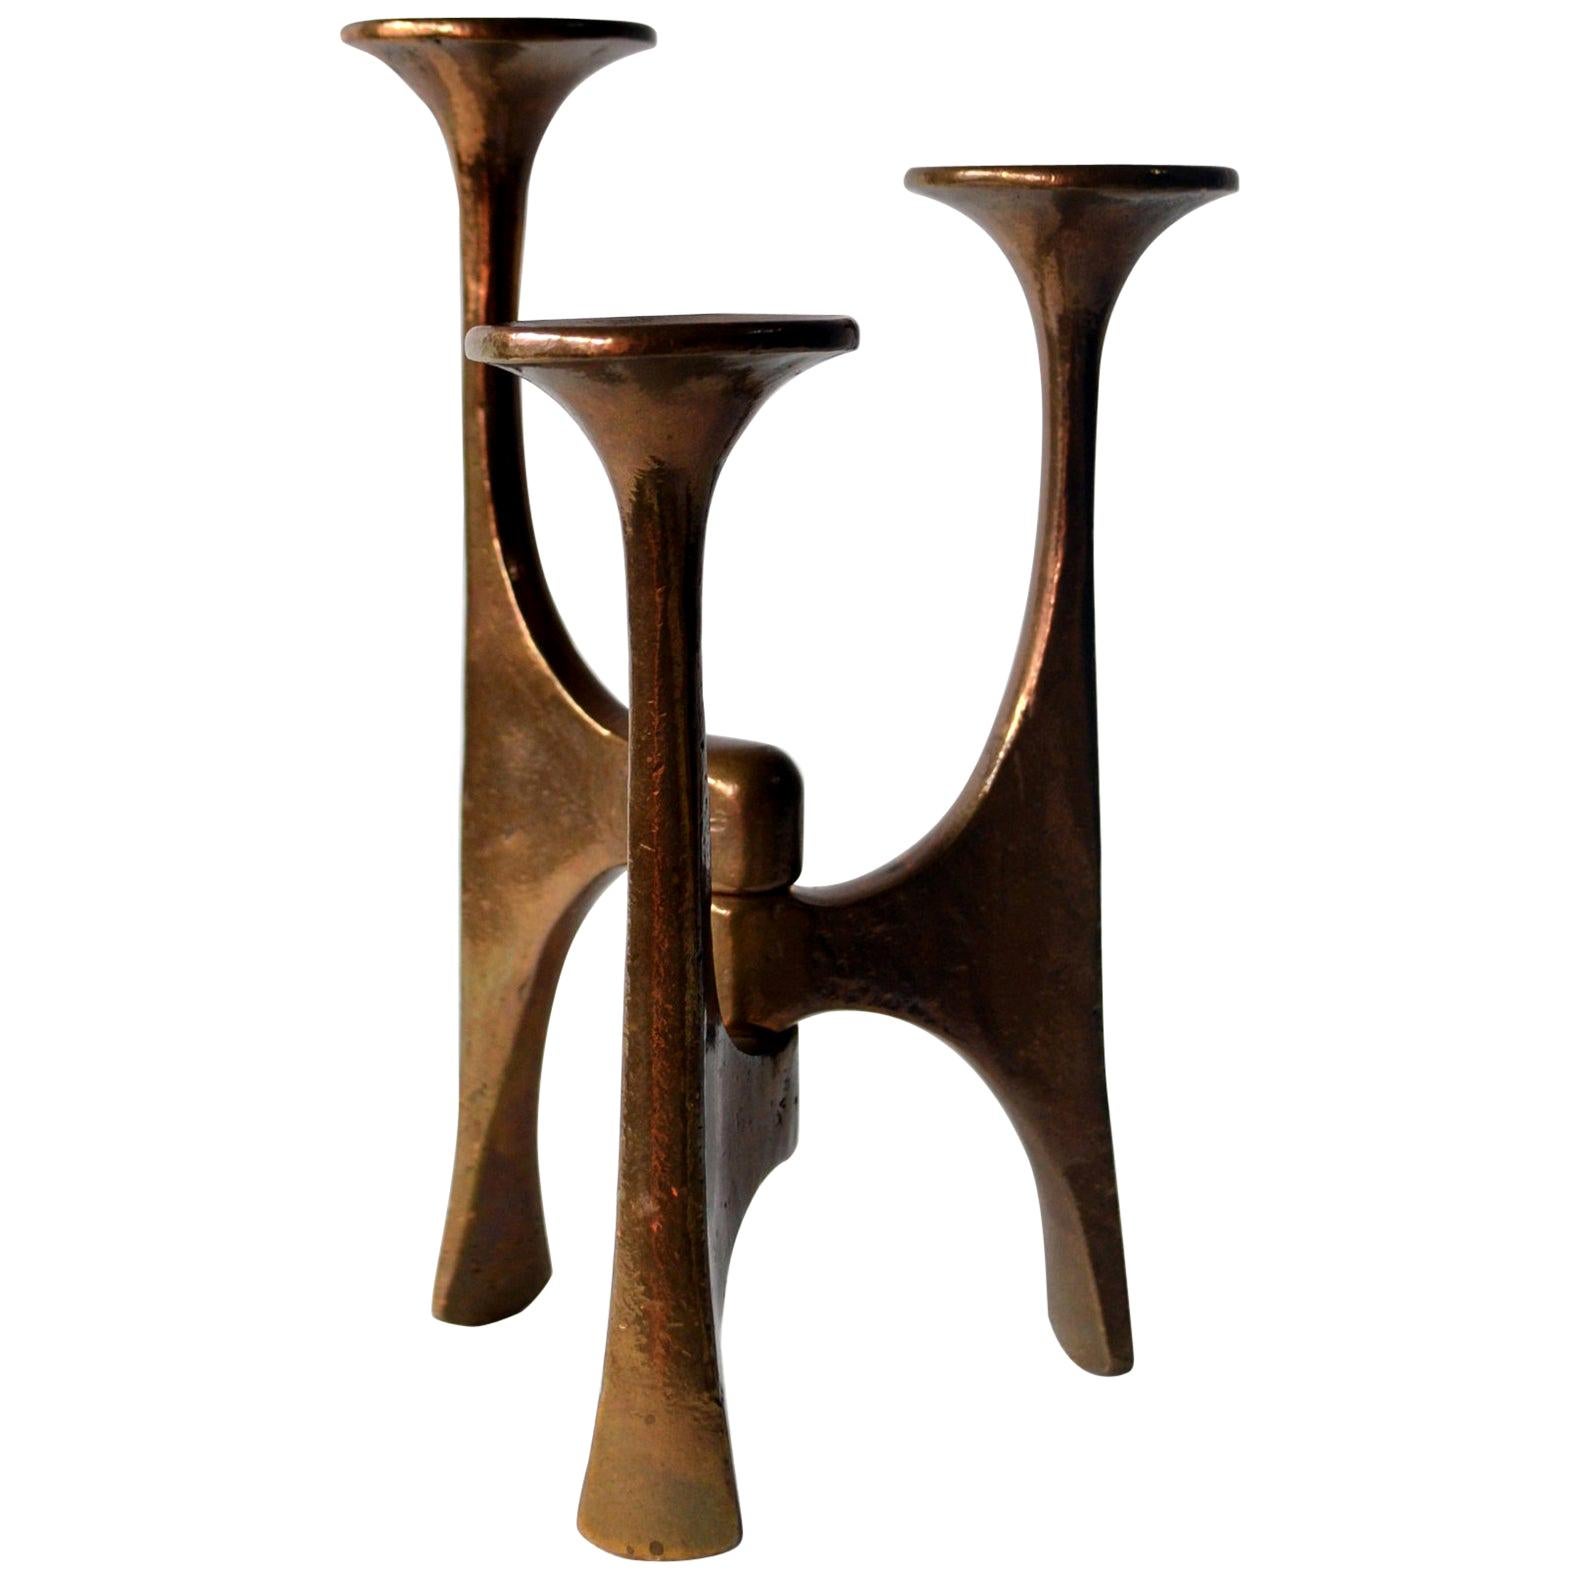 Sculptural Mid-Century Modern Bronze Candleholder with Three Arms